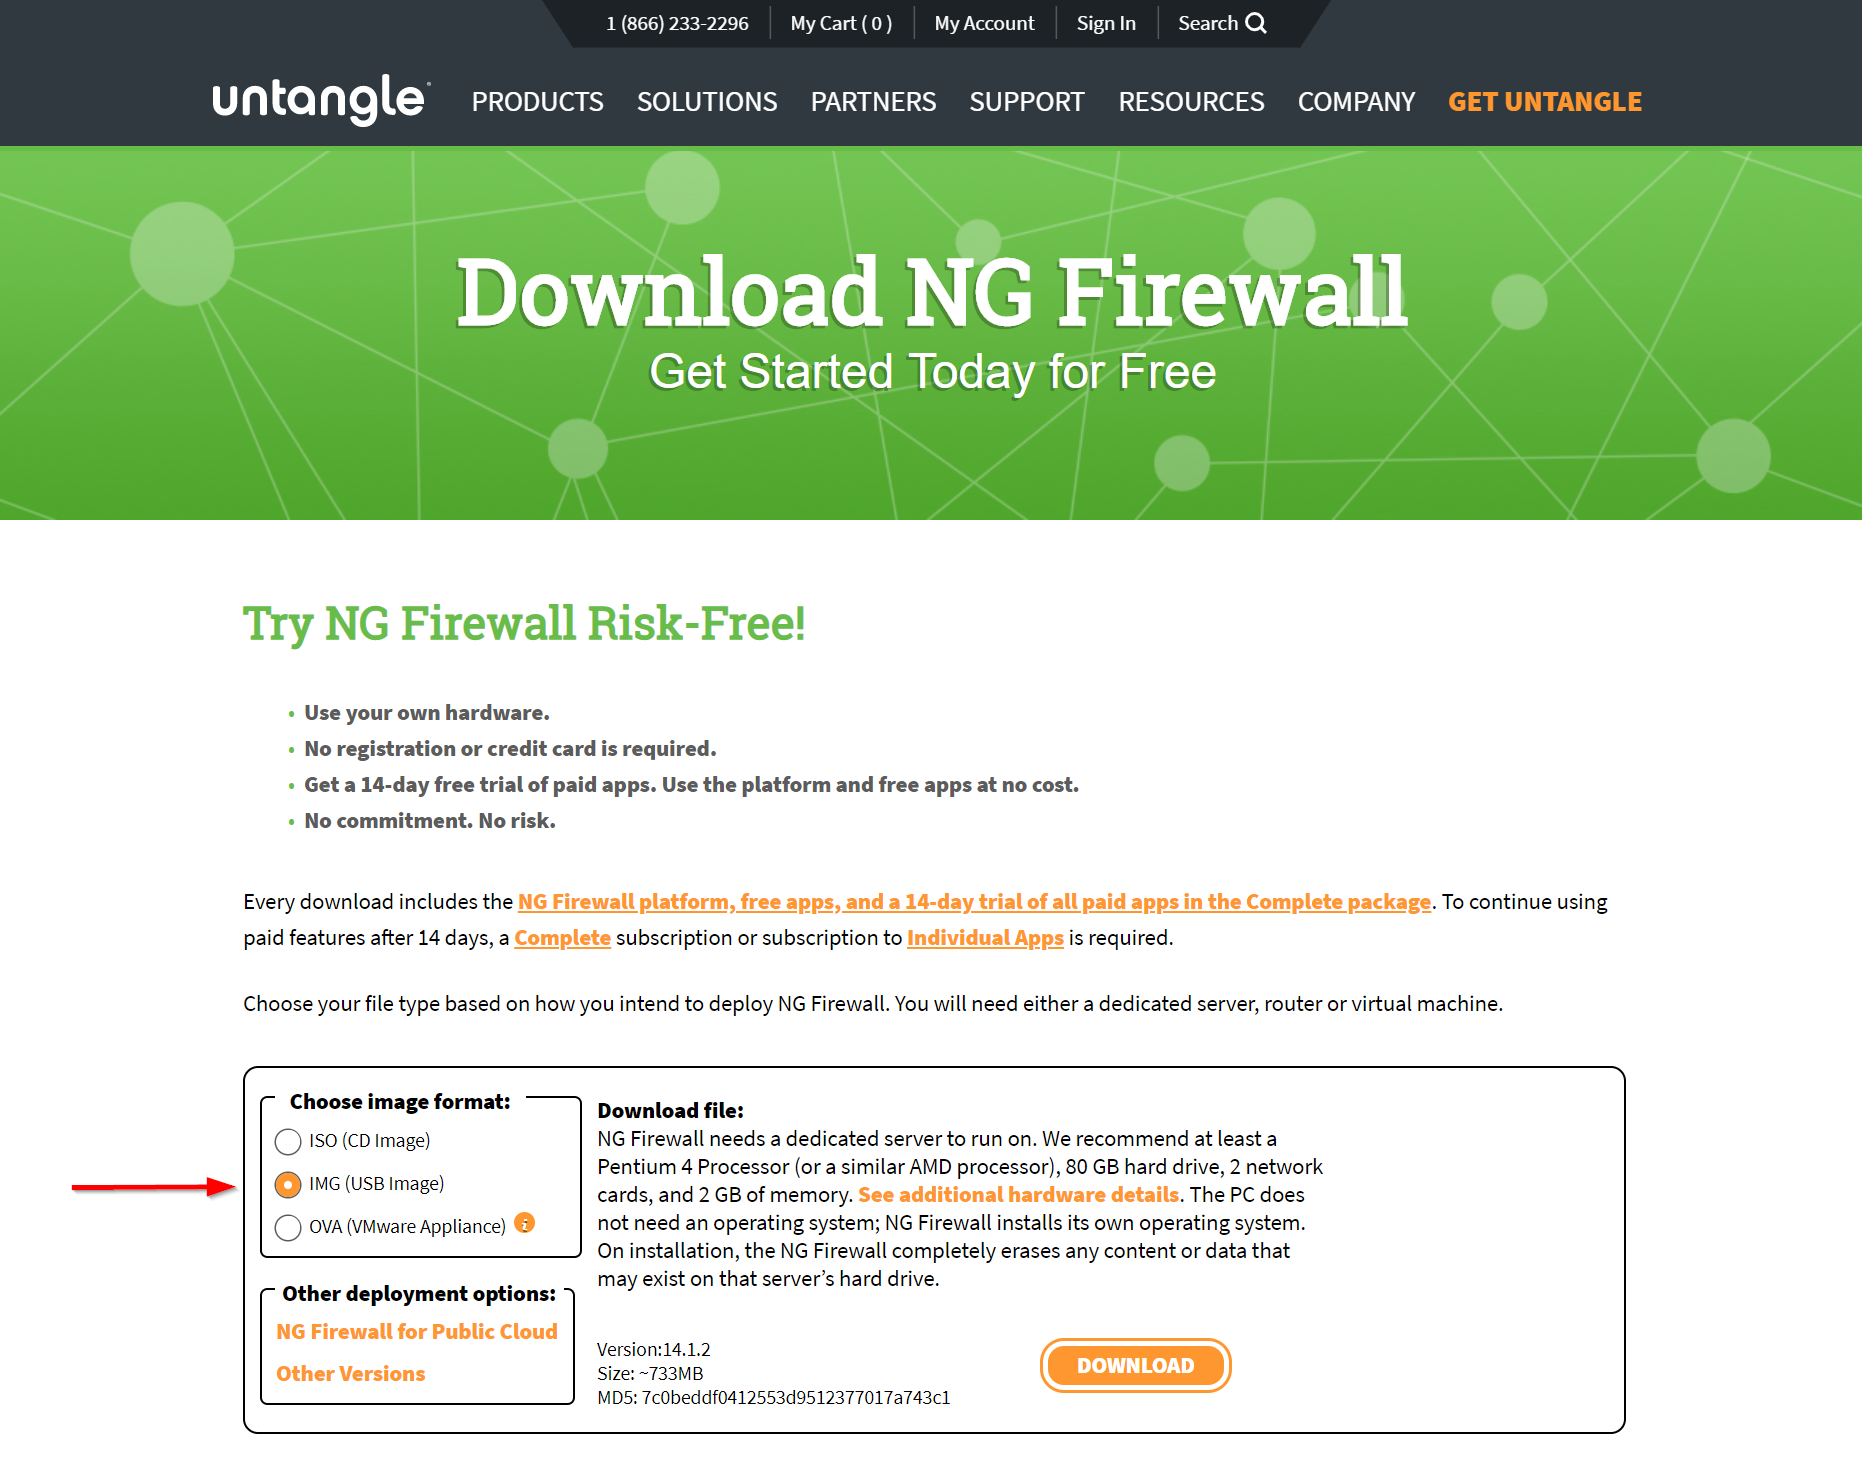 how to configure untangle firewall step by step